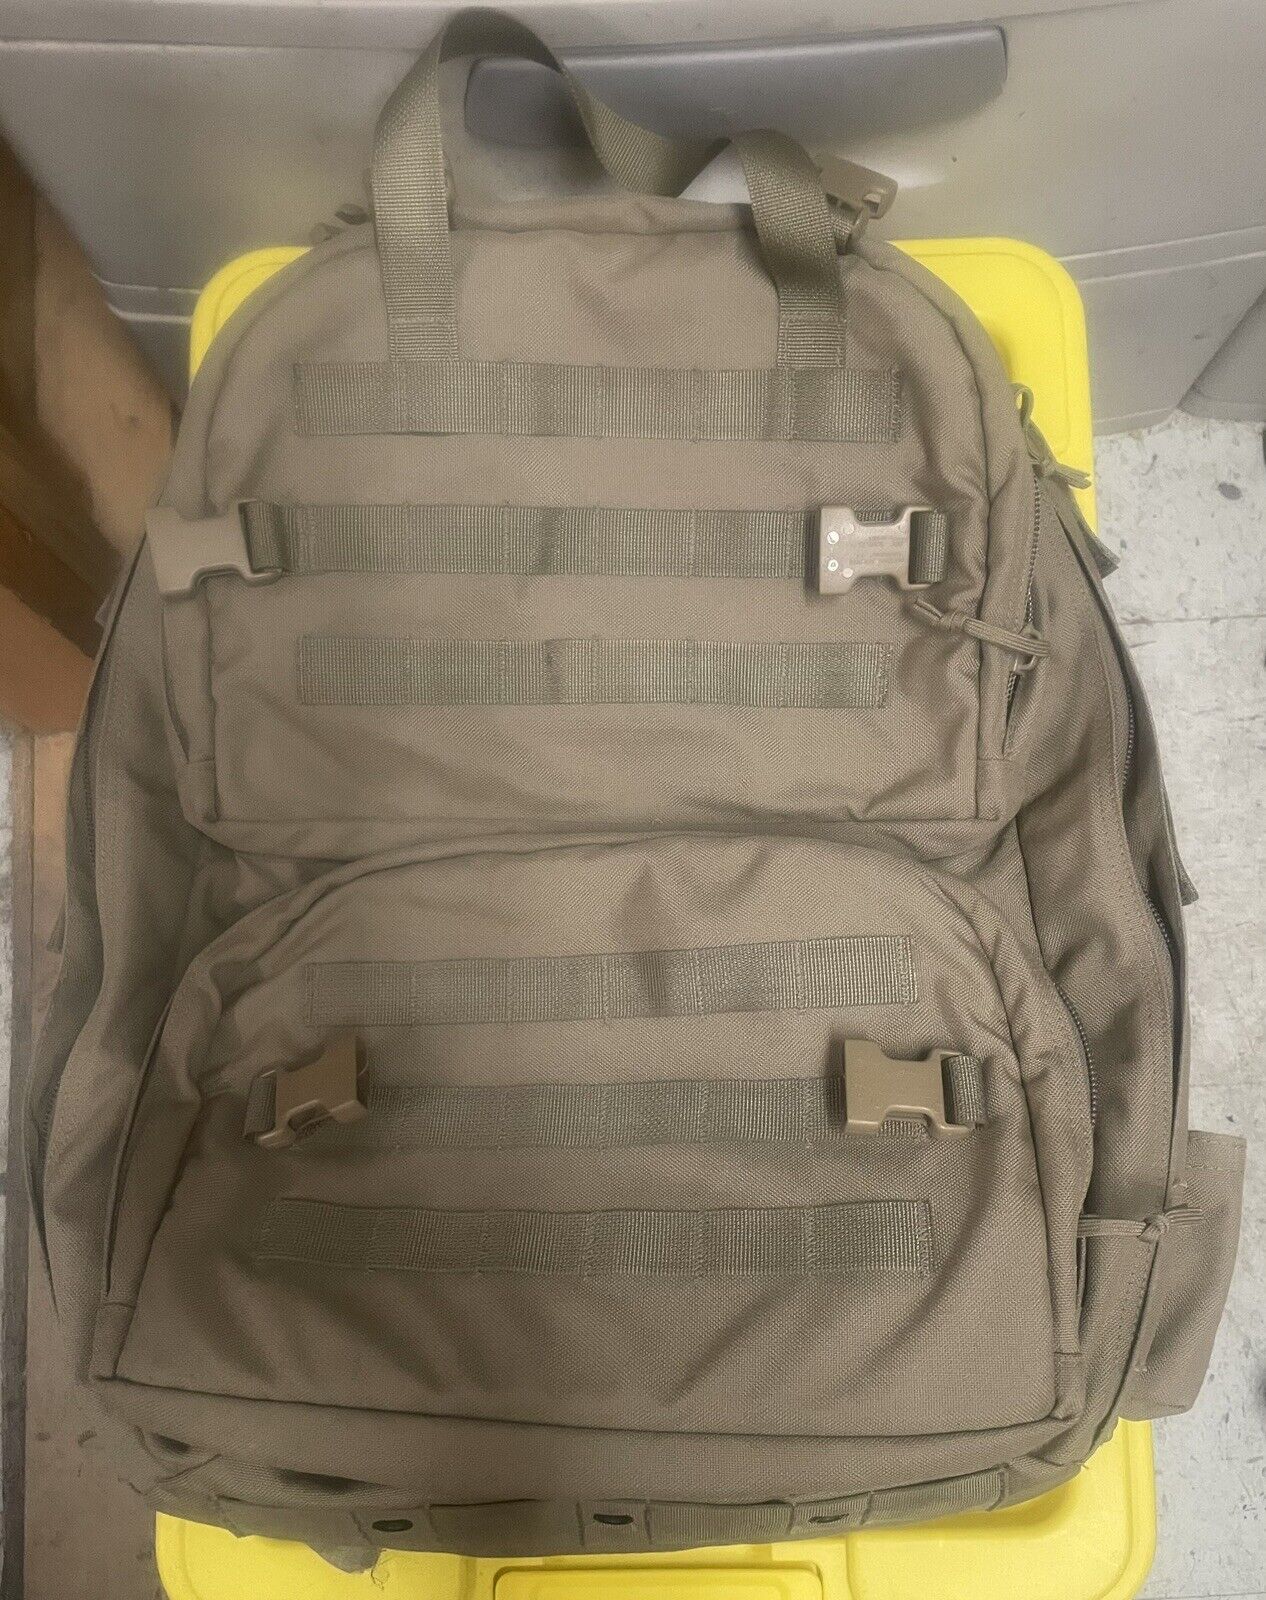 London Bridge Trading LBT-1562A Medial Tactical Field Care Large Jumpable Pack